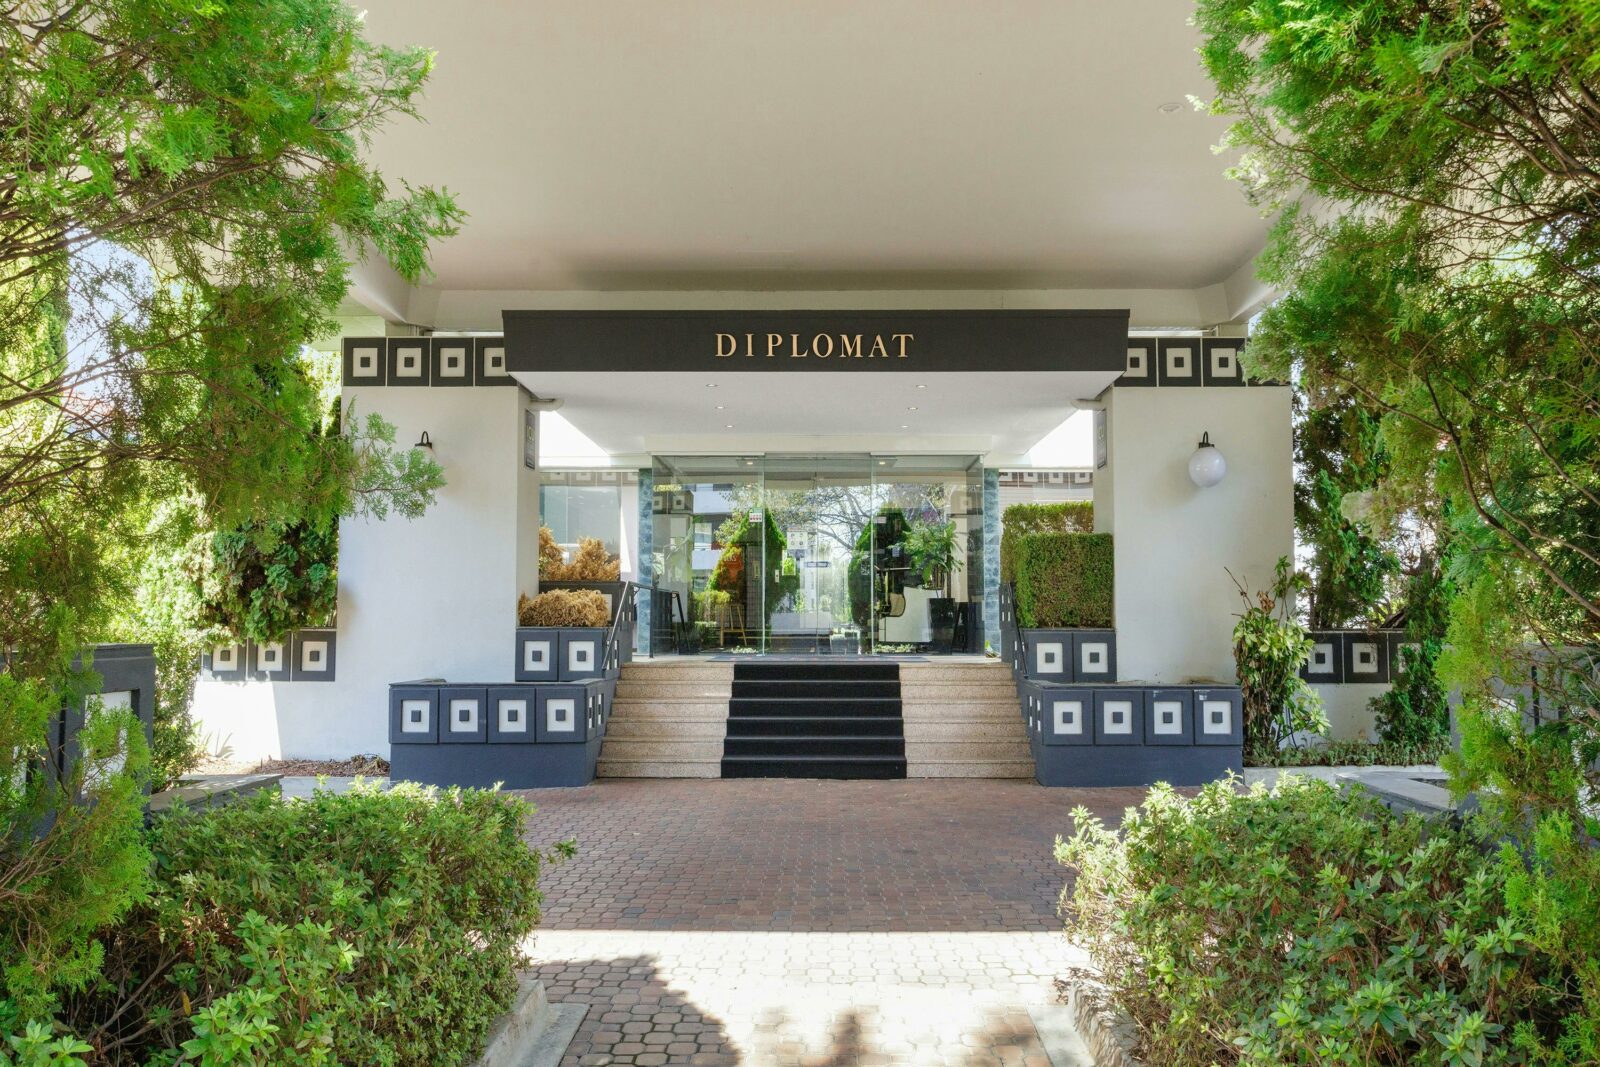 Entrance to Ramada Diplomat Canberra boutique hotel from Hely St Drive way